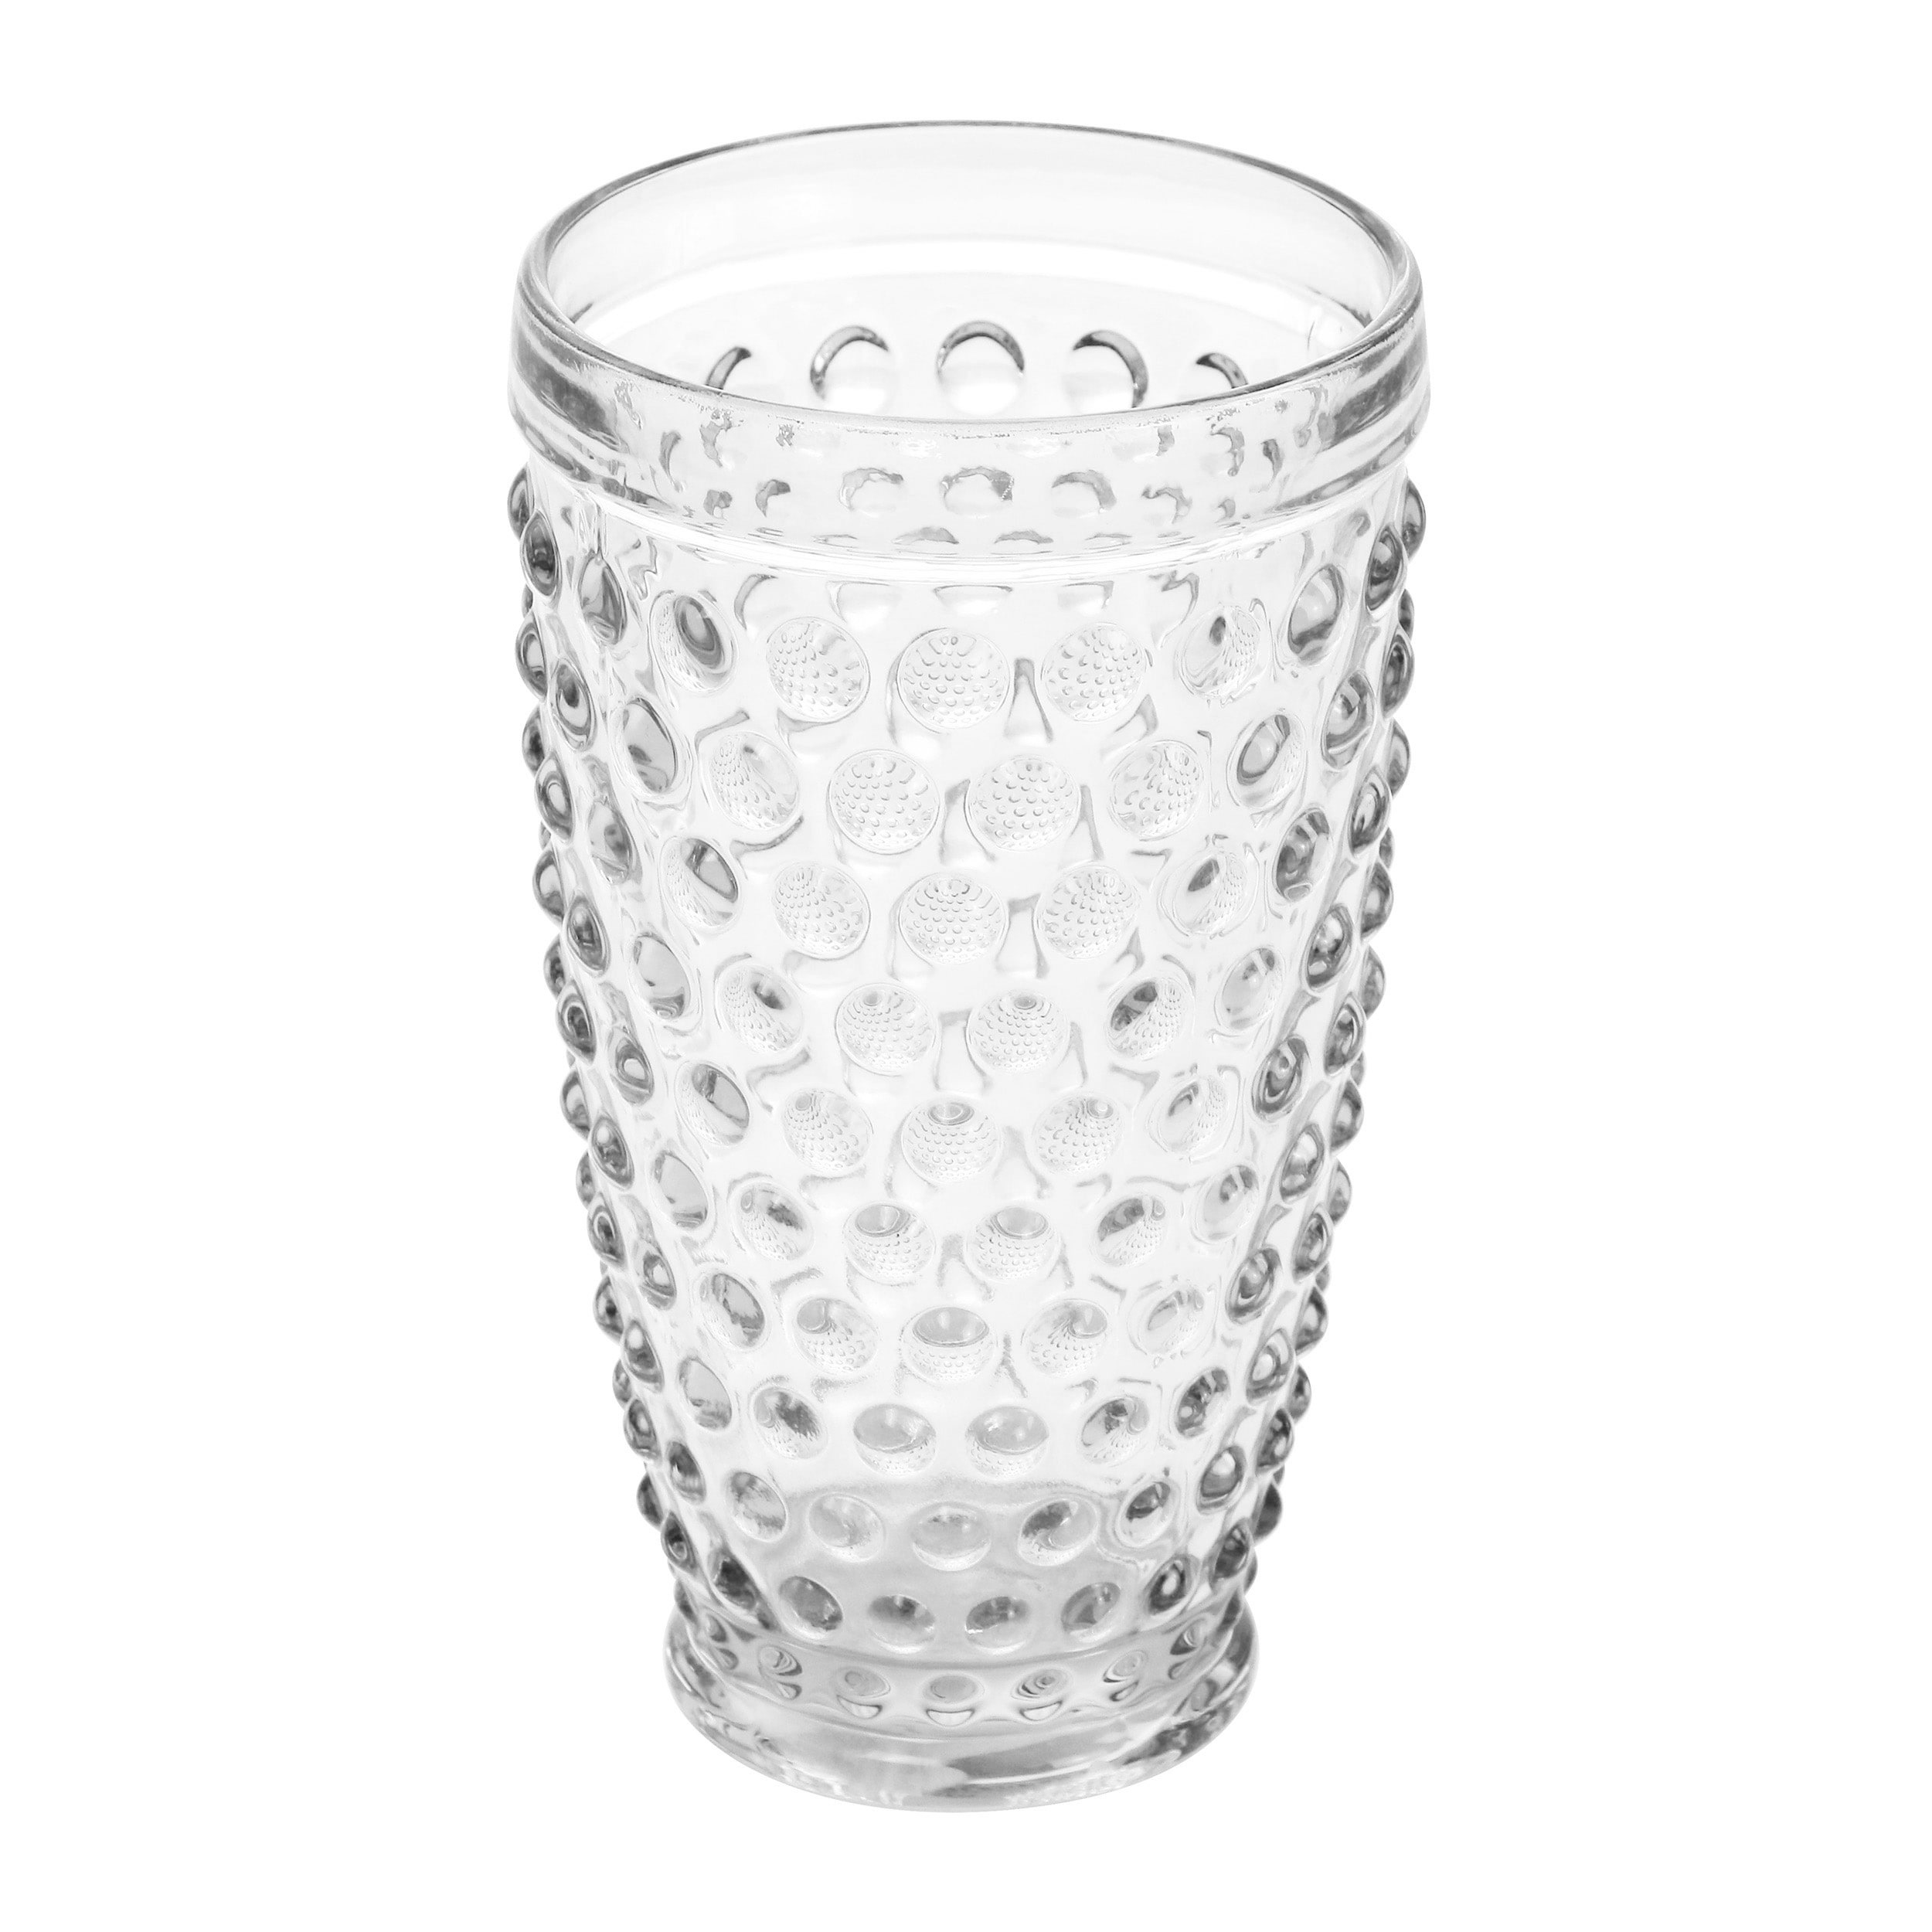 https://ak1.ostkcdn.com/images/products/is/images/direct/70a93c3b40a7540ff223d101ac71c3459c179be0/Martha-Stewart-6-Piece-Hobnail-Handmade-Glass-Tumbler-Set-in-Clear.jpg